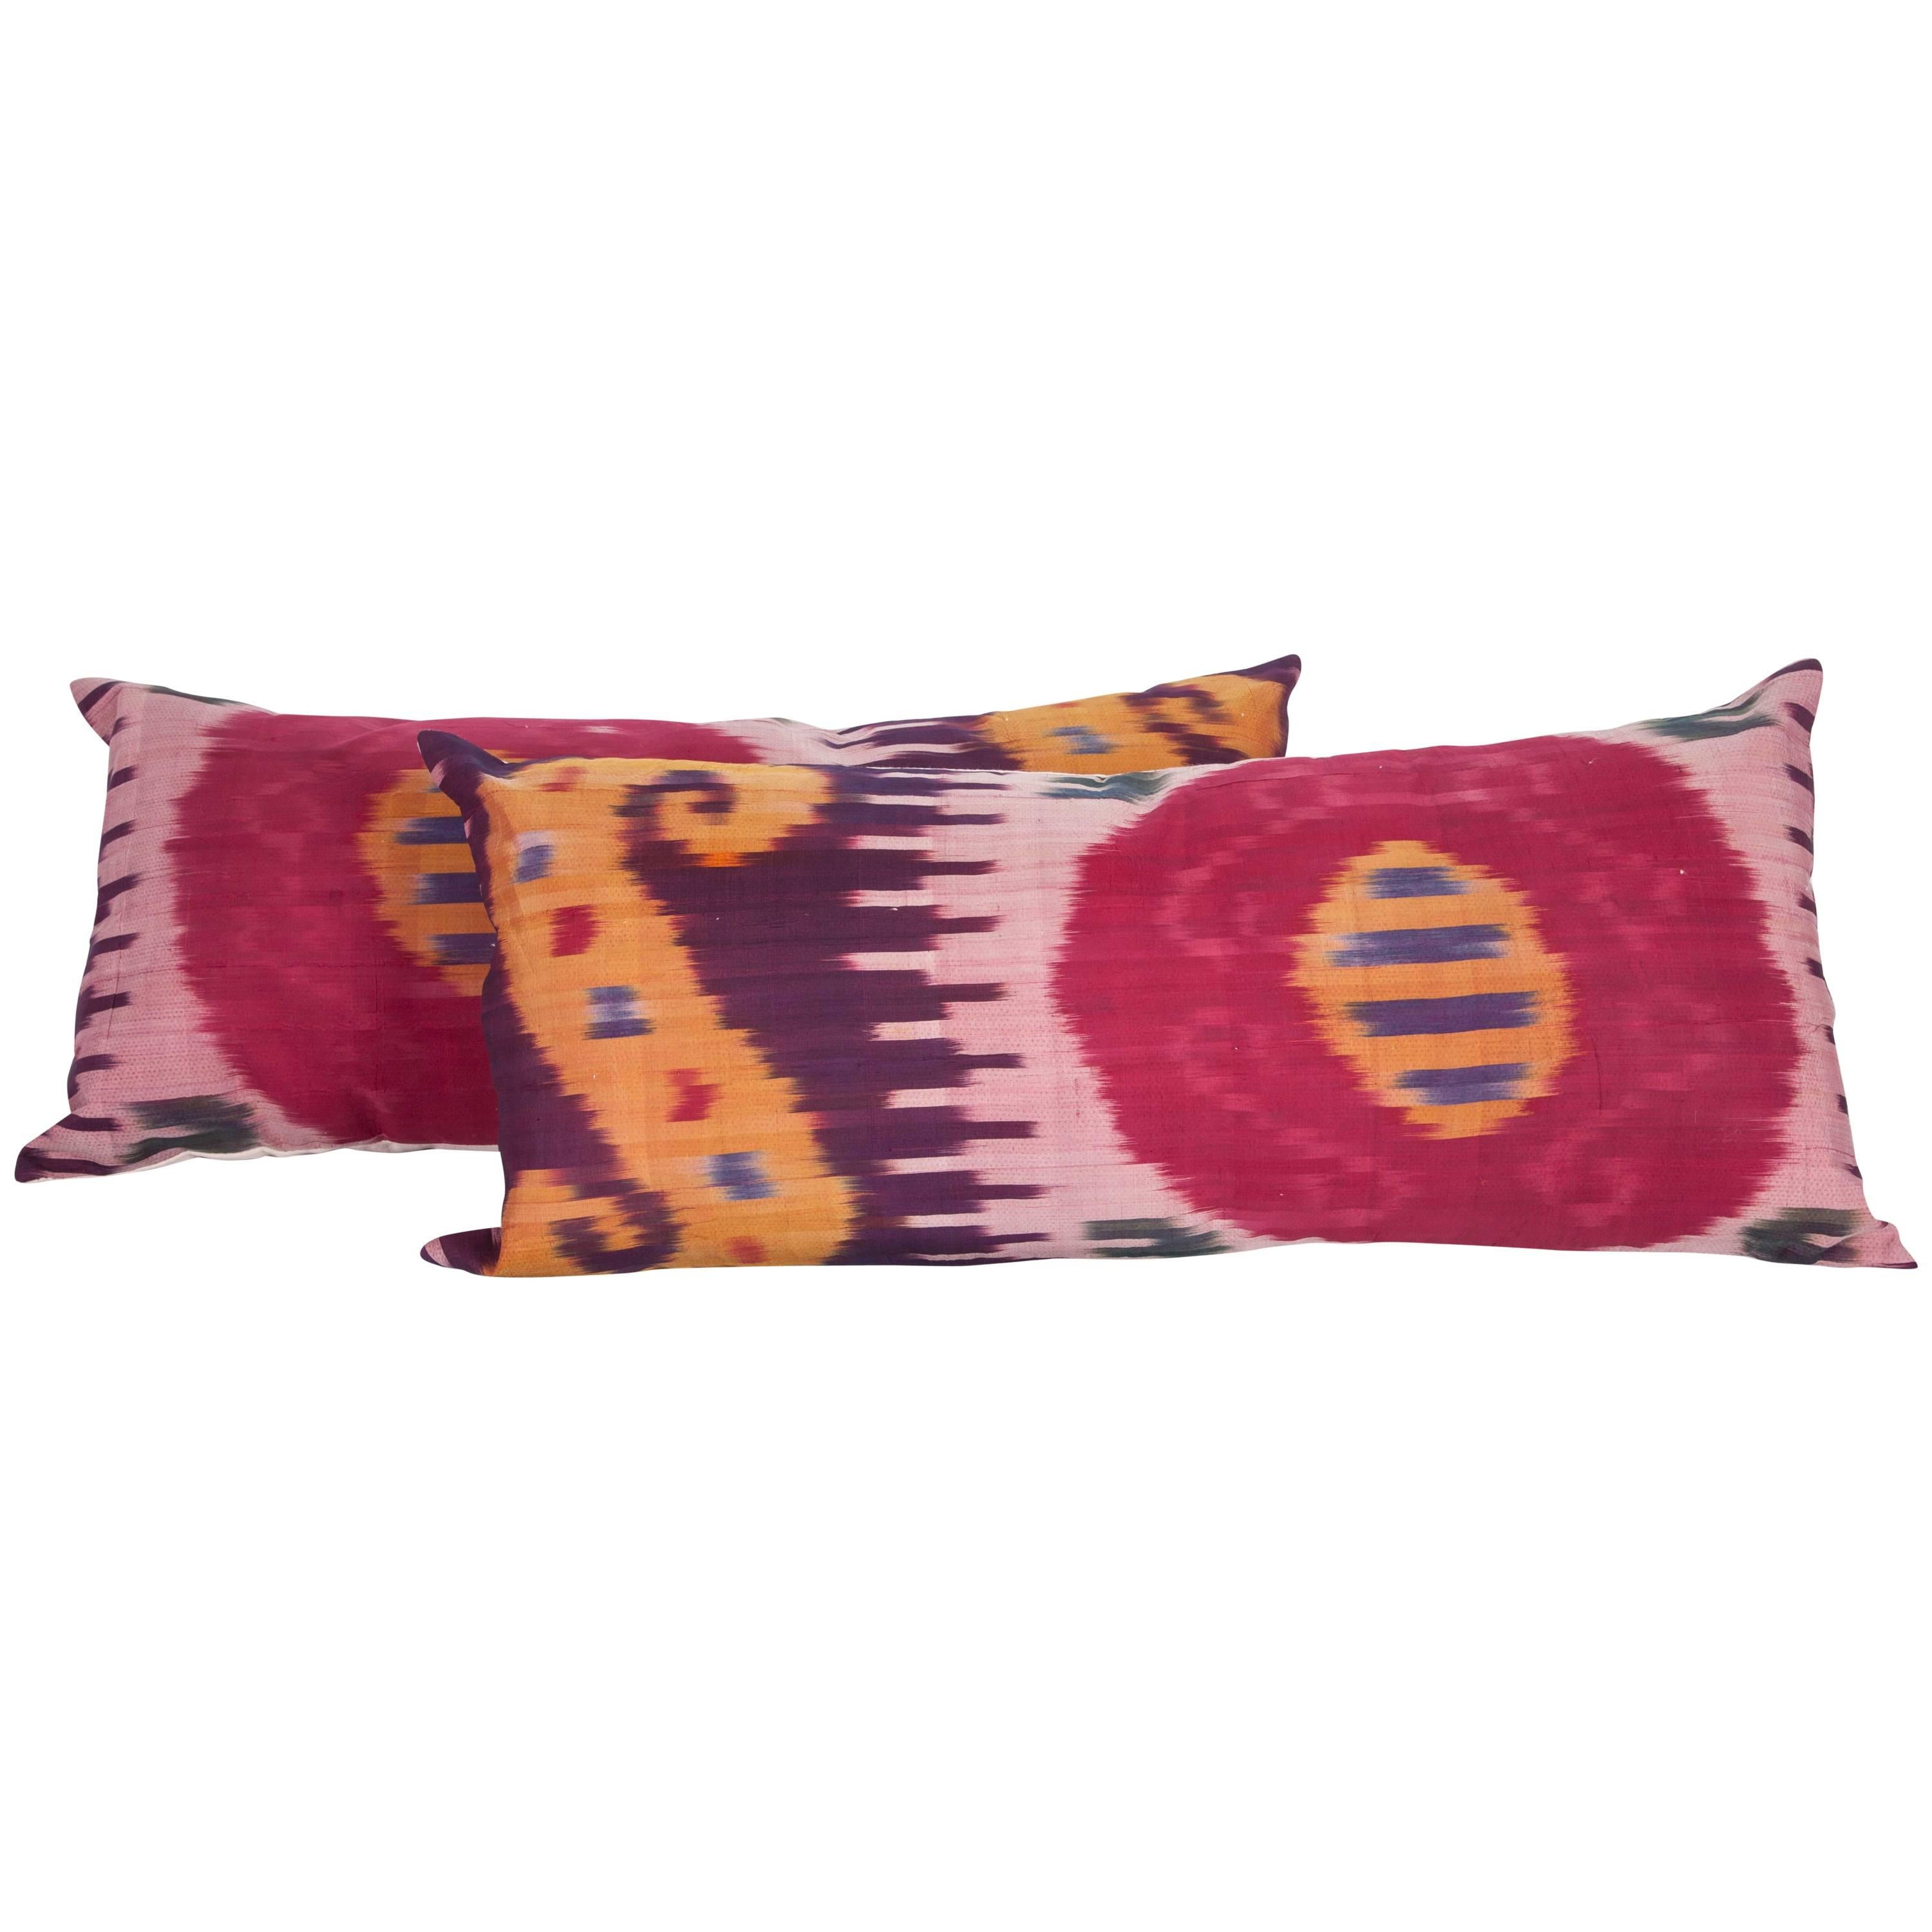 Antique Ikat Pillow Cases Fashioned from an Early 20th Century Uzbek Ikat